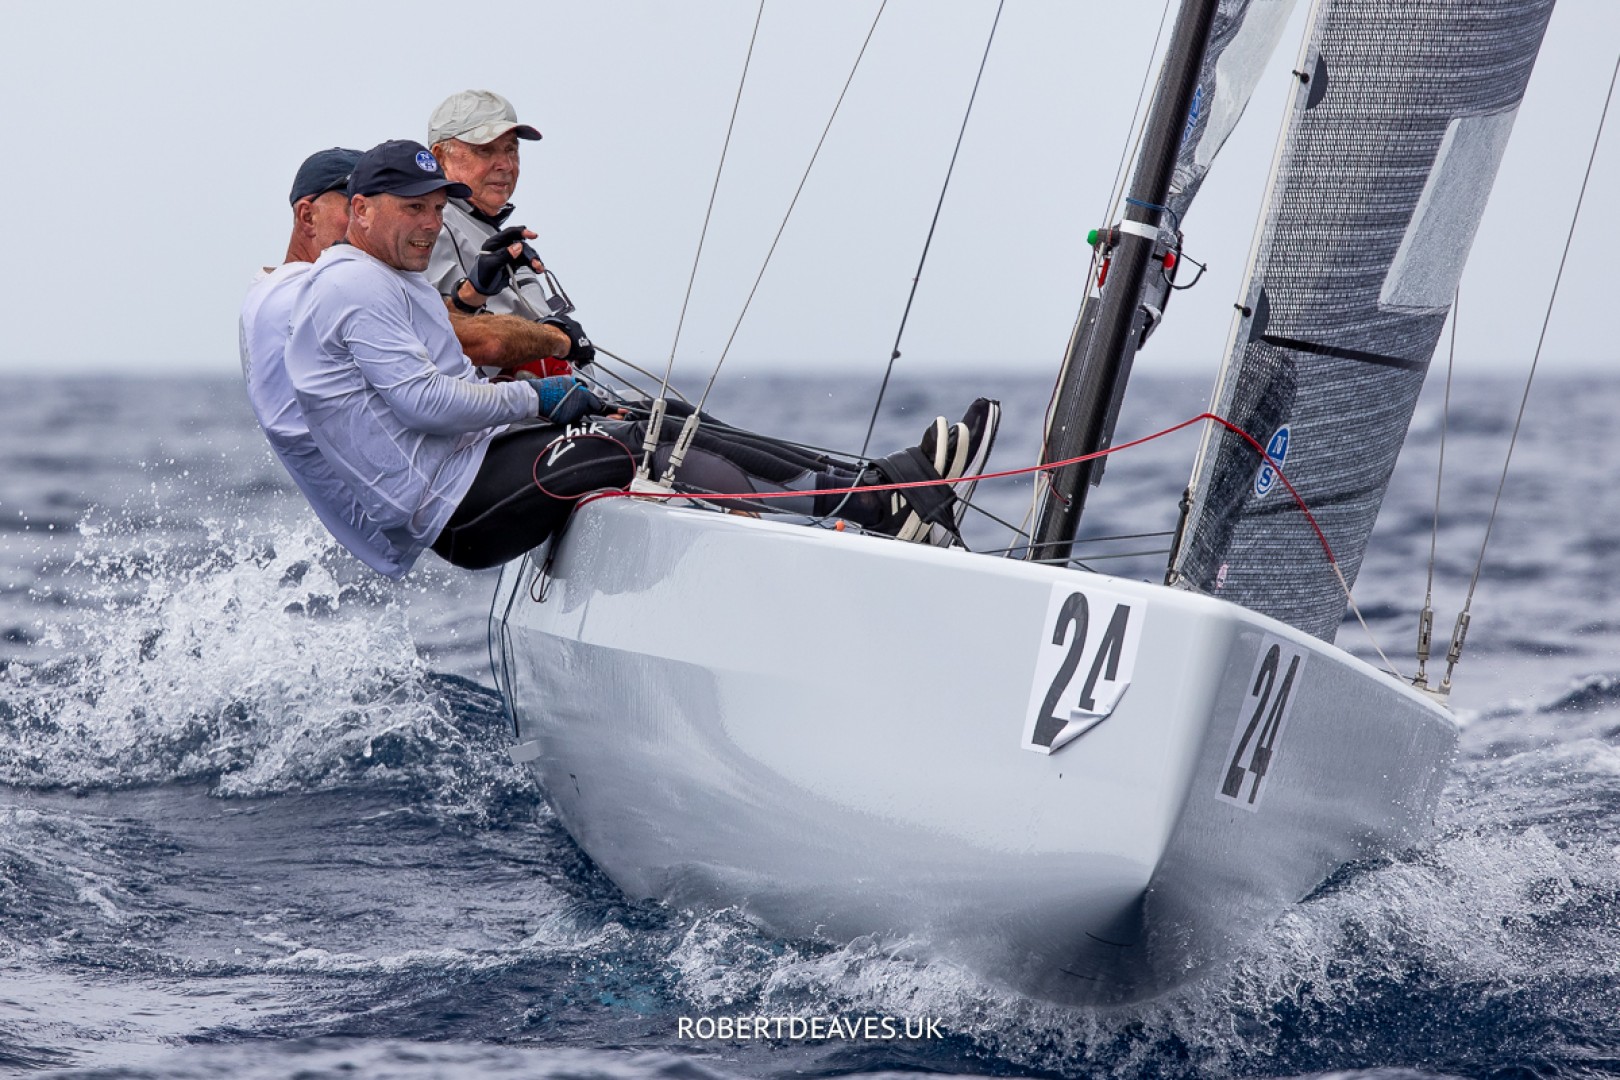 Big win for The Jean Genie on second day of 5.5 Metre Scandinavia Gold Cup